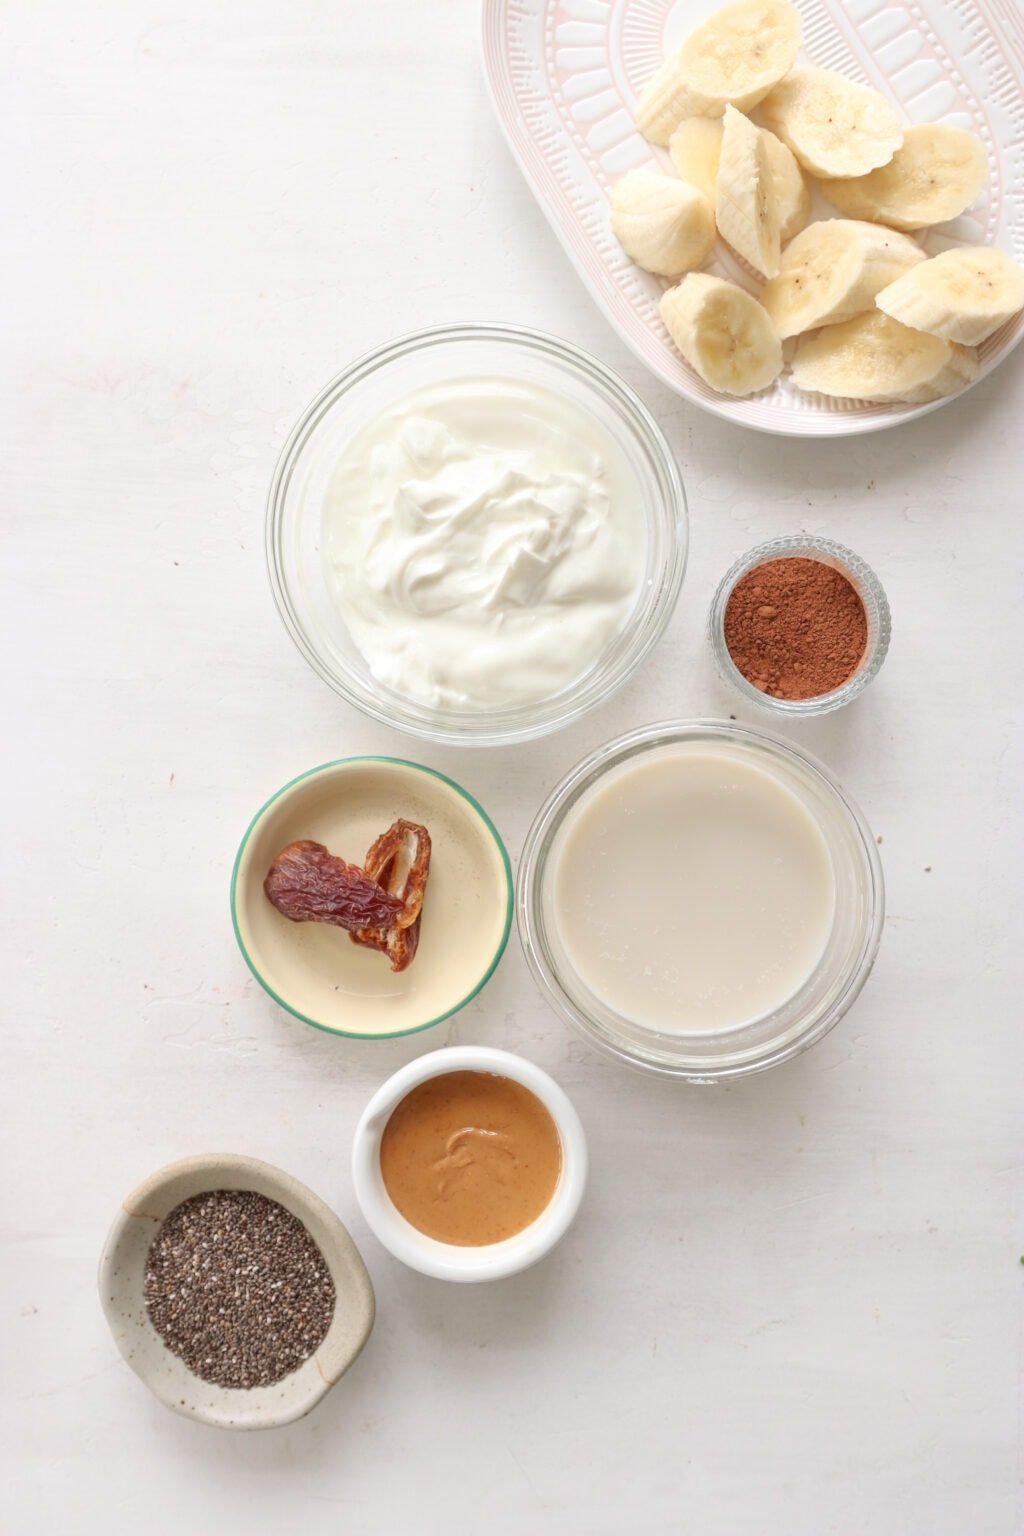 Ingredients for a 5 minute chocolate banana chia seed smoothie in glass bowls, including milk, chia seeds, cocoa, Greek yogurt, banana, nut, and a medjool date